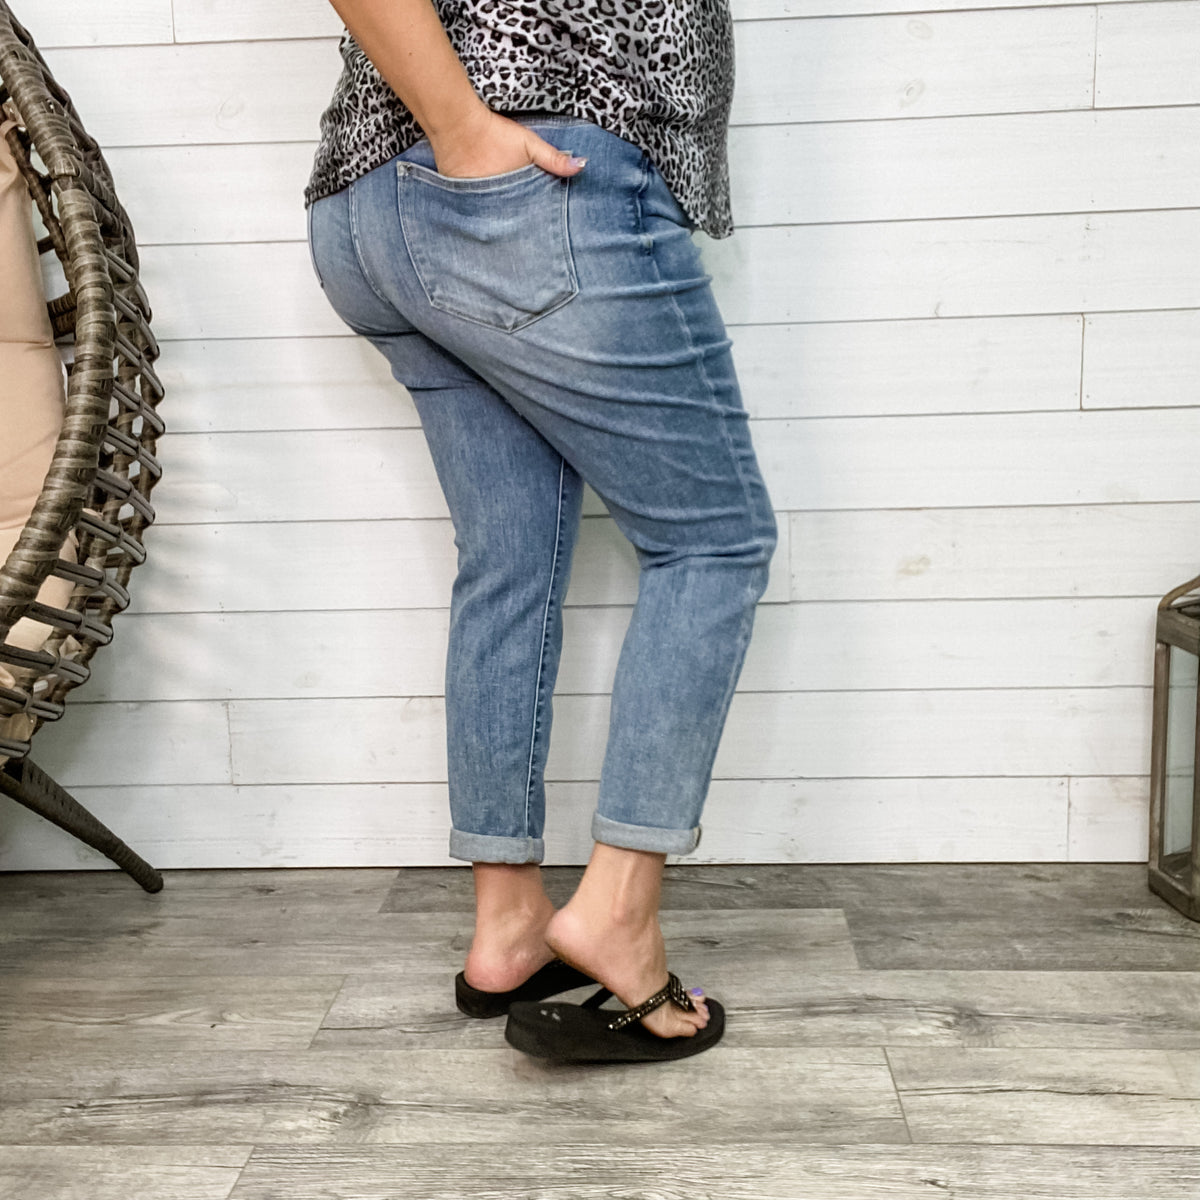 Judy Blue "I'll Be There For You" Boyfriend Jeans